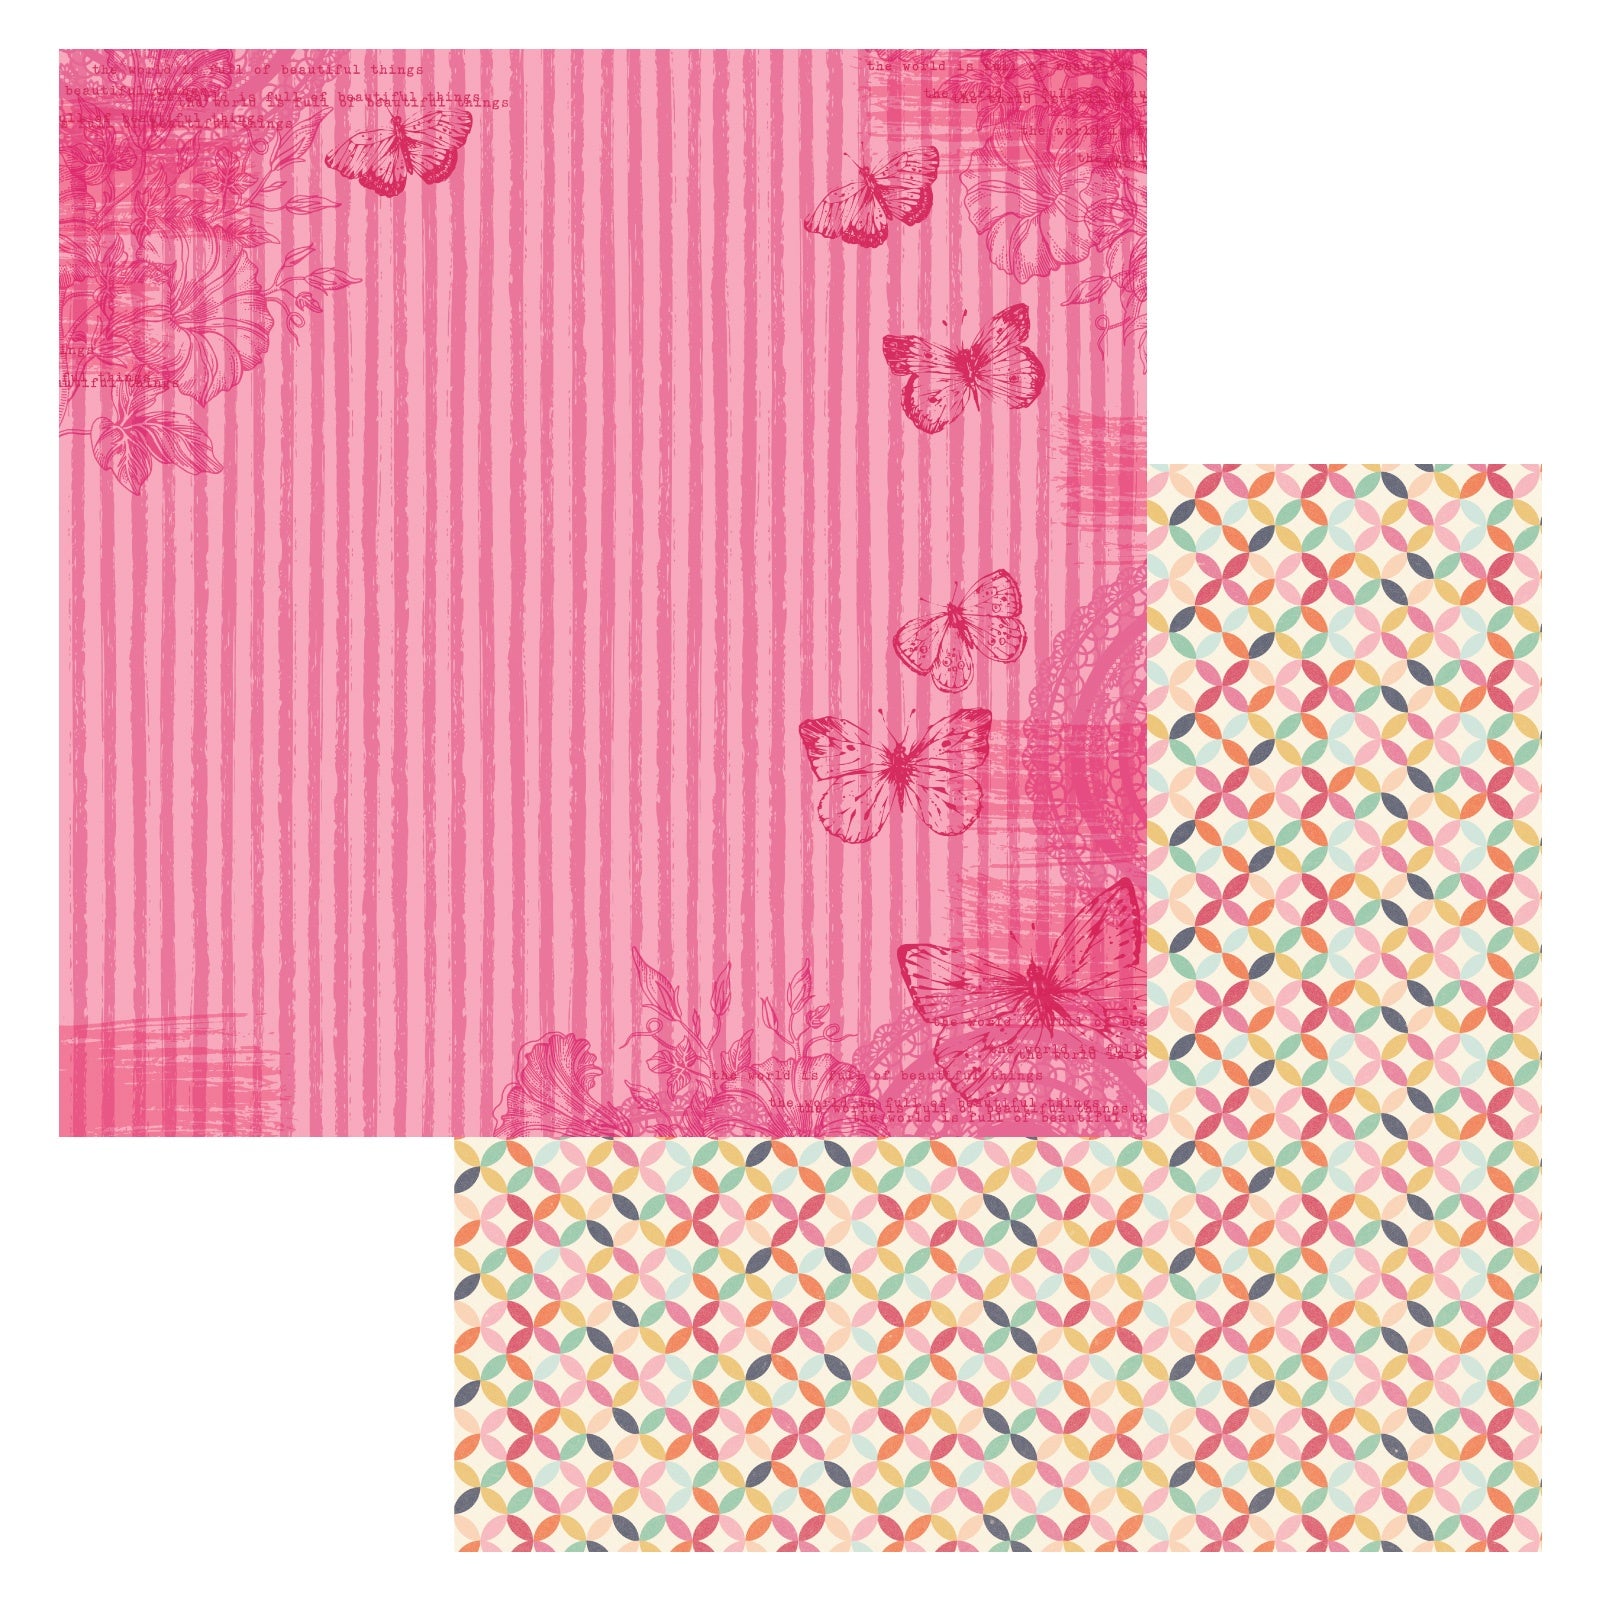 Paper House Productions - 12 x 12 Double Sided Paper - Pink Watercolor Floral